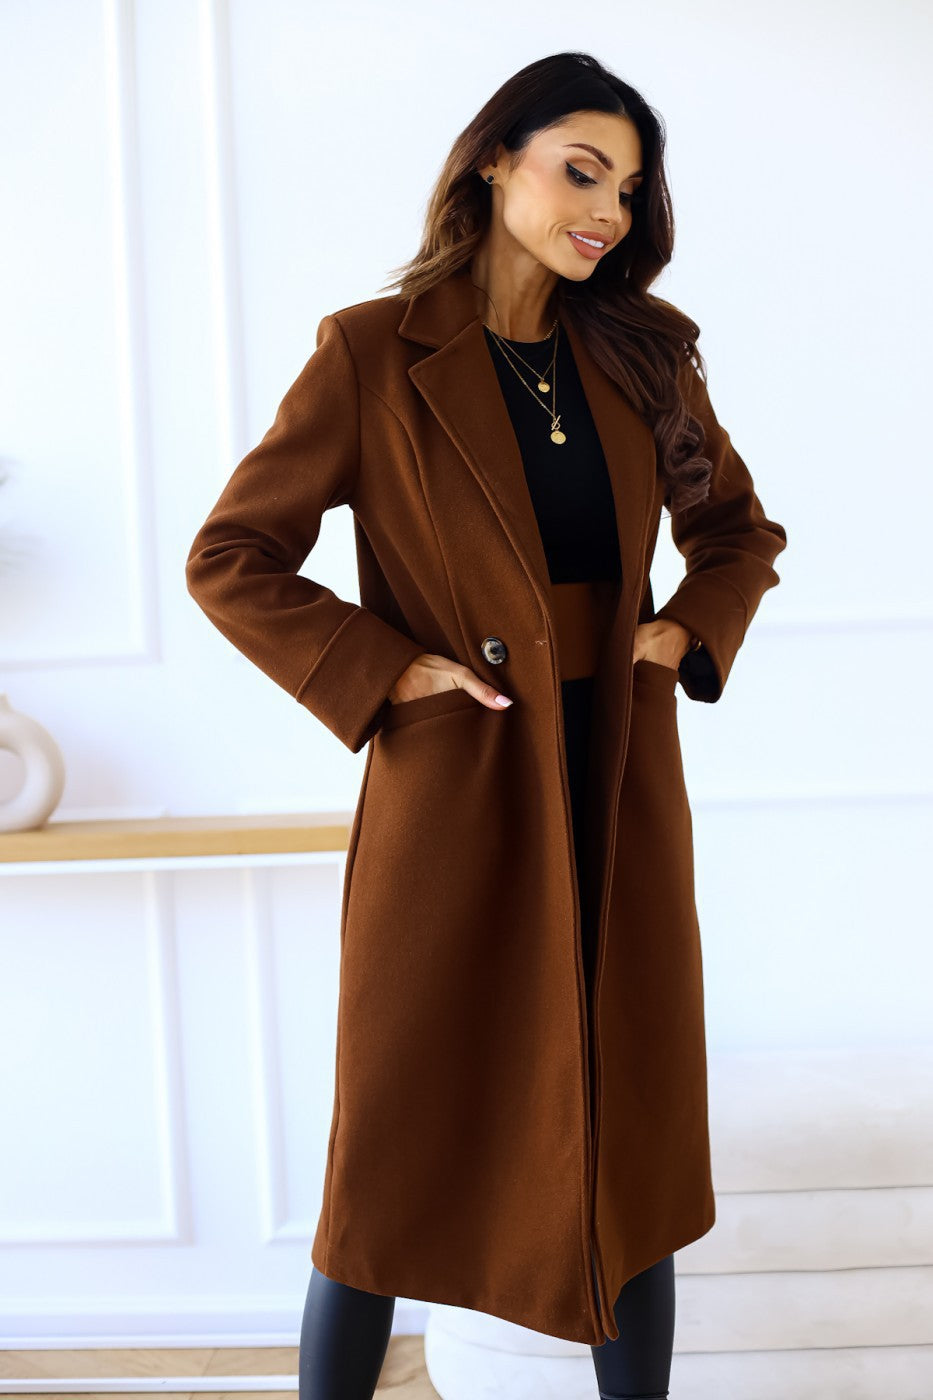 Trench Coat Outfits | Chic Thanksgiving Trench Coat – TGC FASHION